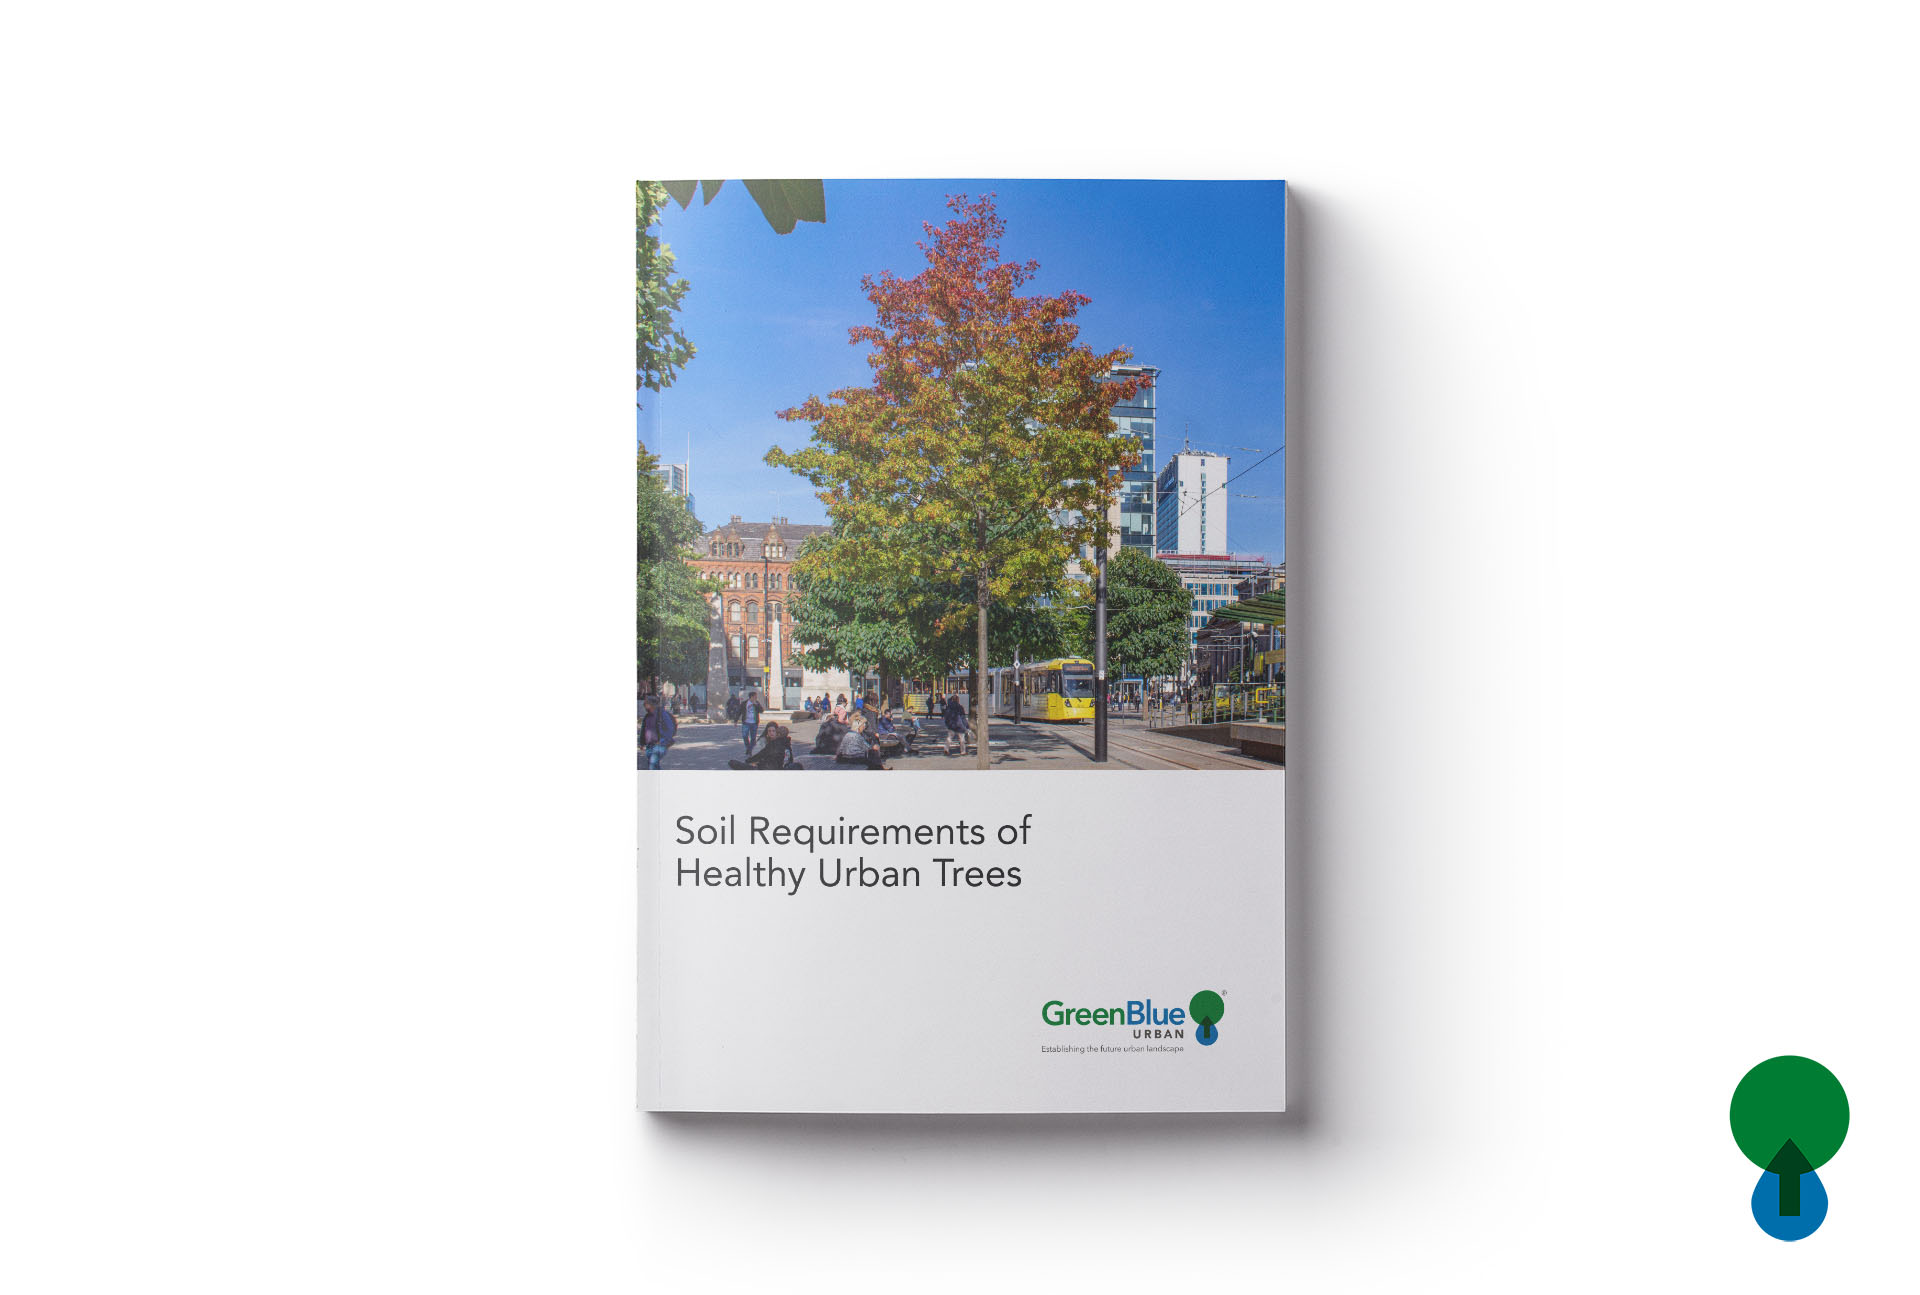 Resource: Soil Requirements of Healthy Urban Trees